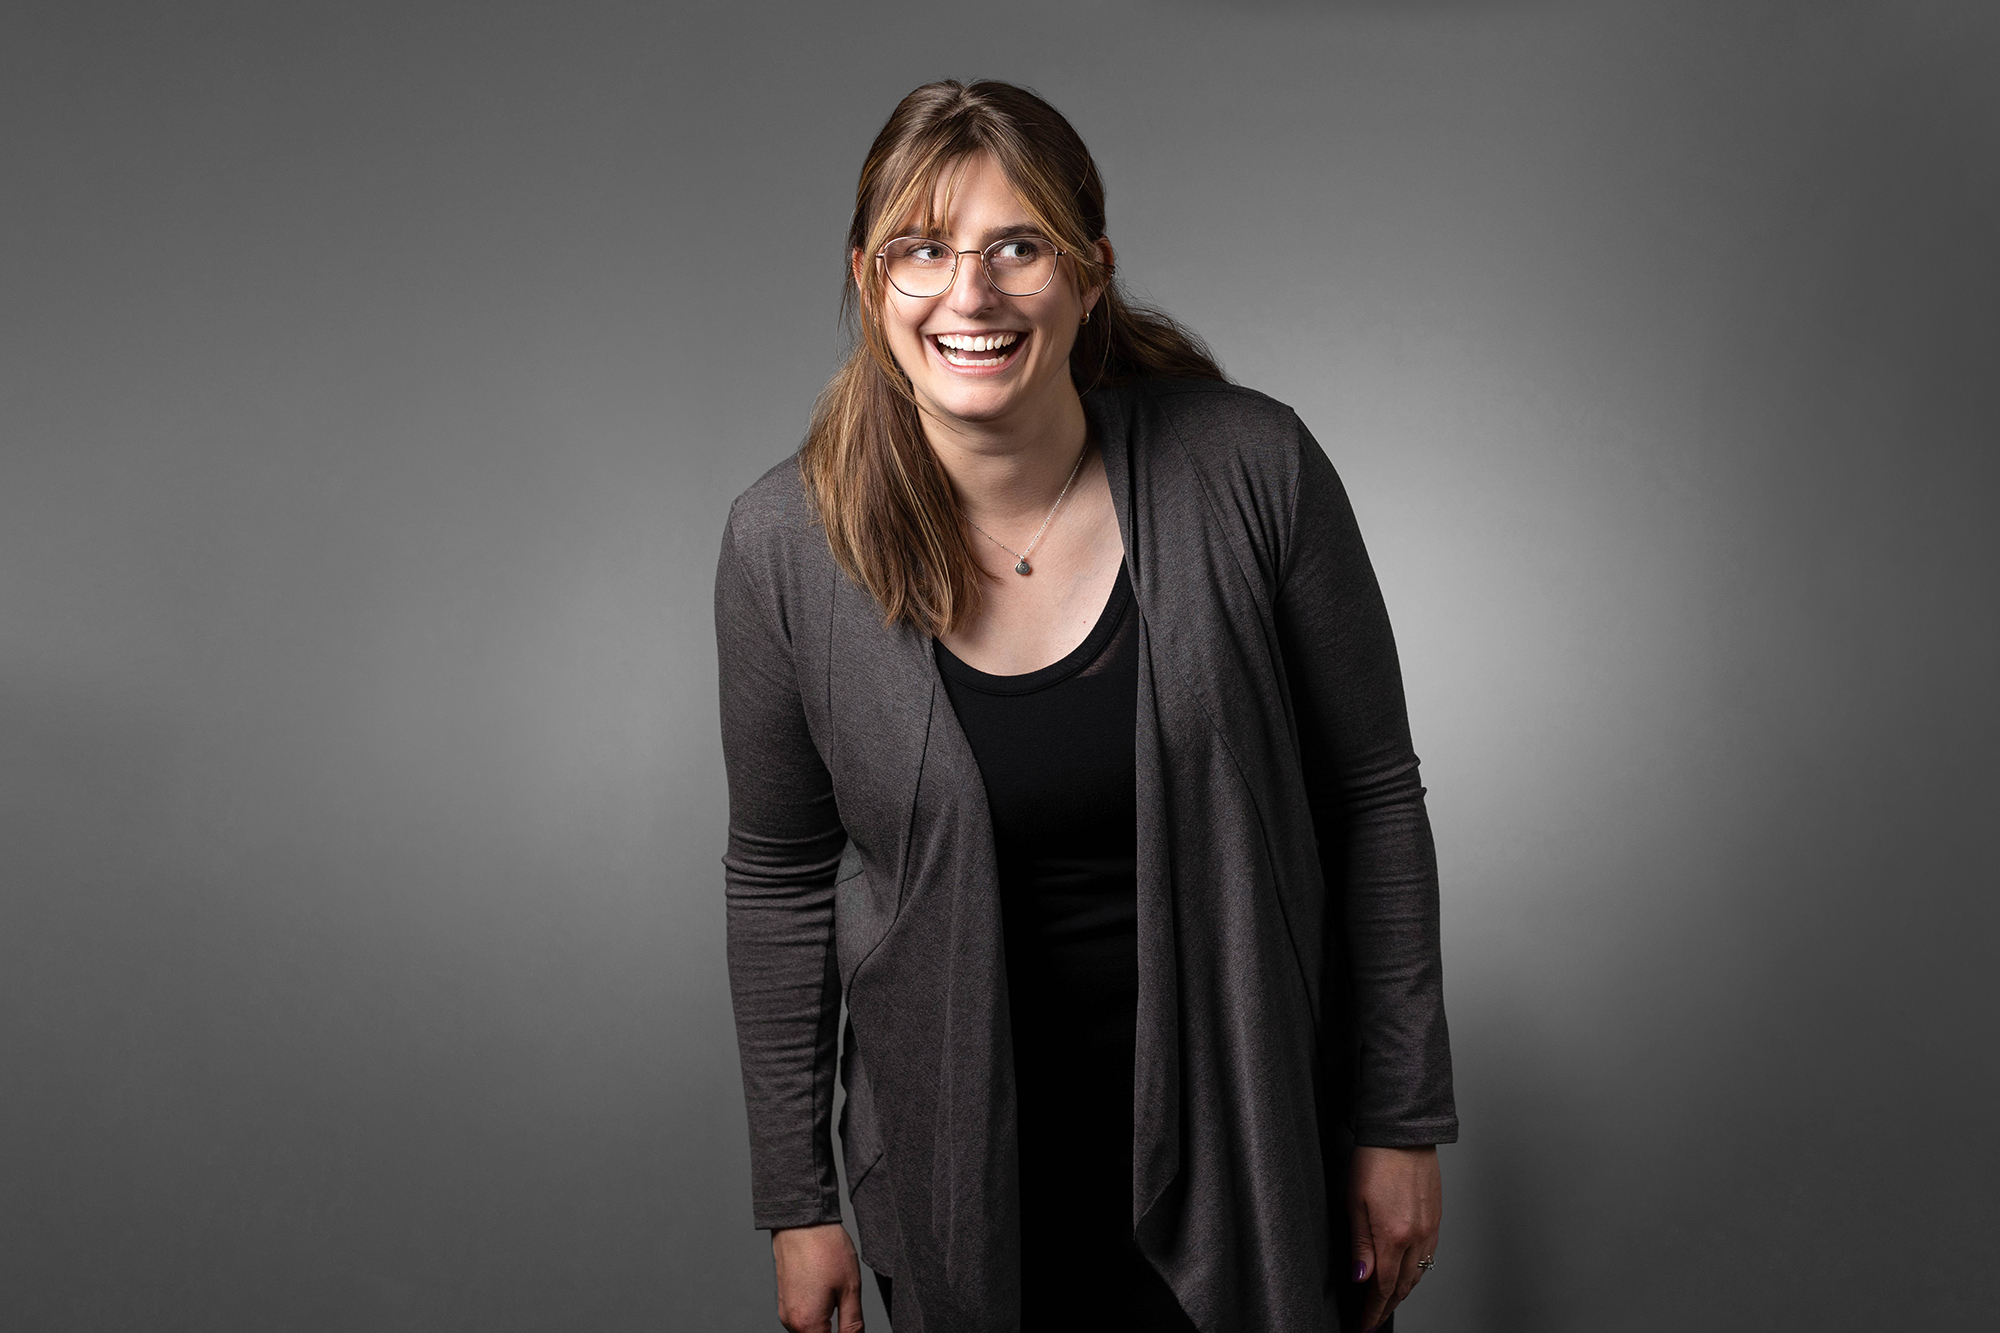 A woman in a gray cardigan is smiling in front of a gray background, presenting her professional corporate headshot.